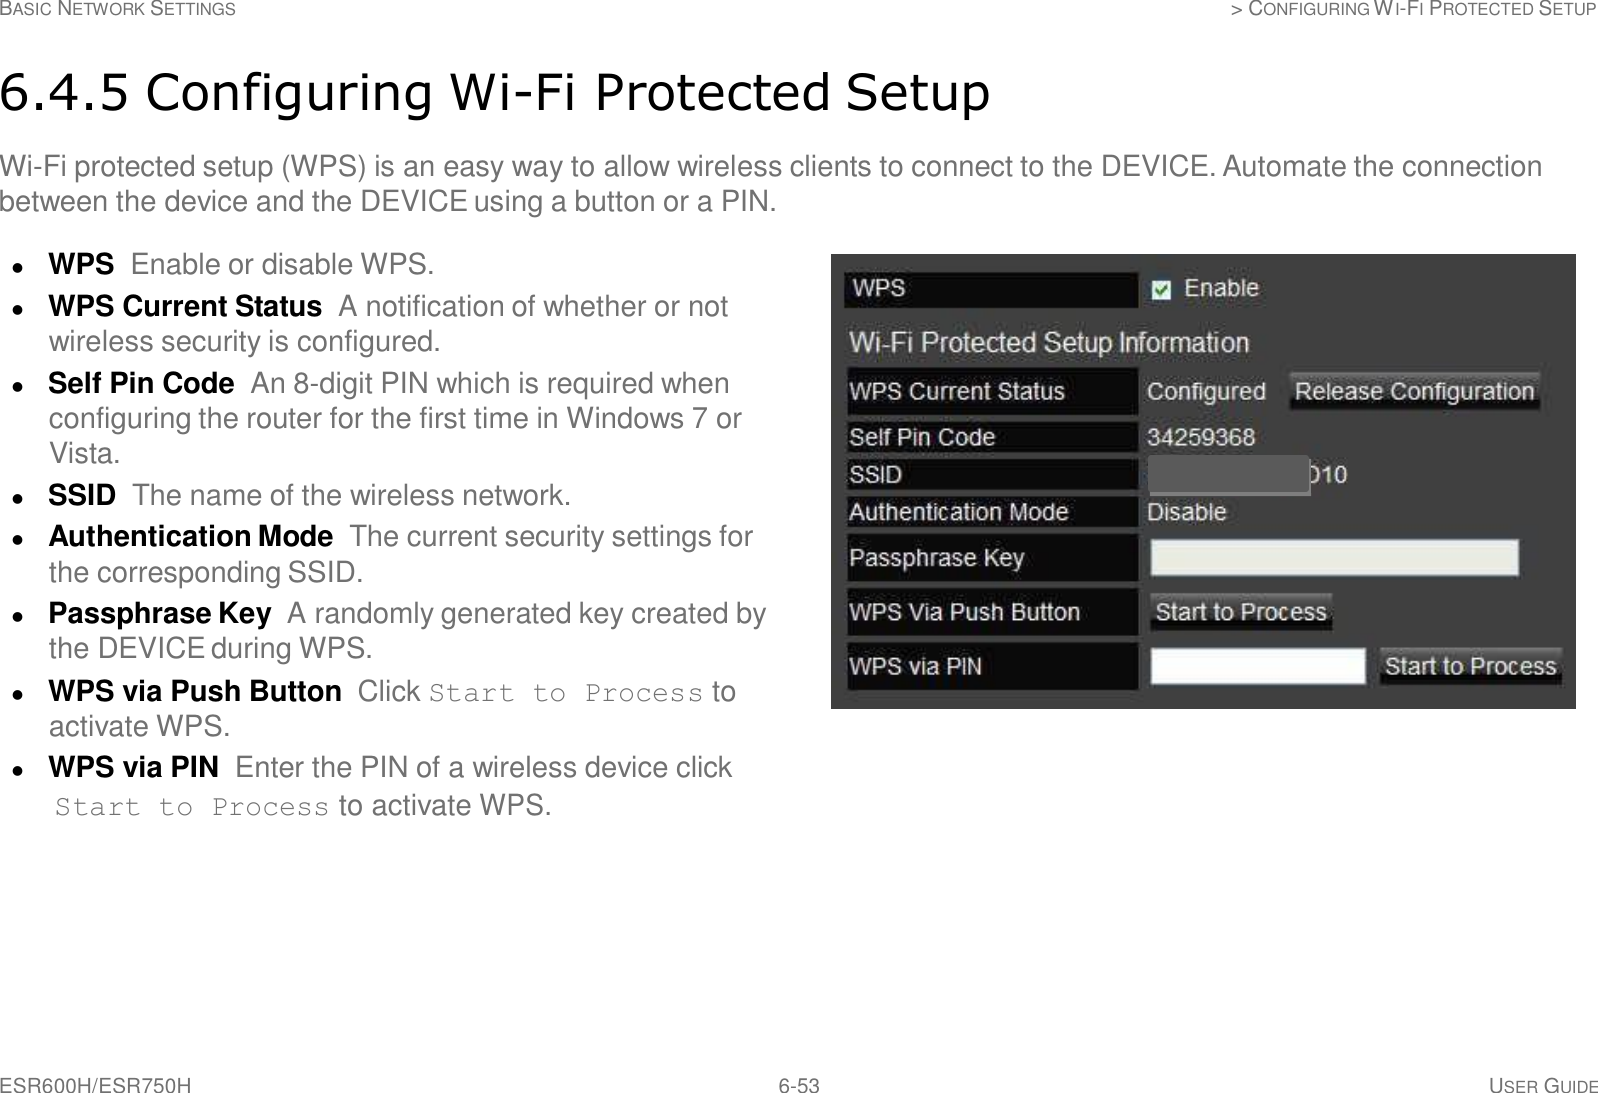 ESR600H/ESR750H 6-53 USER GUIDE BASIC NETWORK SETTINGS &gt; CONFIGURING WI-FI PROTECTED SETUP     6.4.5 Configuring Wi-Fi Protected Setup  Wi-Fi protected setup (WPS) is an easy way to allow wireless clients to connect to the DEVICE. Automate the connection between the device and the DEVICE using a button or a PIN.   WPS Enable or disable WPS.  WPS Current Status  A notification of whether or not wireless security is configured.  Self Pin Code  An 8-digit PIN which is required when configuring the router for the first time in Windows 7 or Vista.  SSID  The name of the wireless network.  Authentication Mode  The current security settings for the corresponding SSID.  Passphrase Key  A randomly generated key created by the DEVICE during WPS.  WPS via Push Button  Click Start to Process to activate WPS.  WPS via PIN  Enter the PIN of a wireless device click Start to Process to activate WPS. 